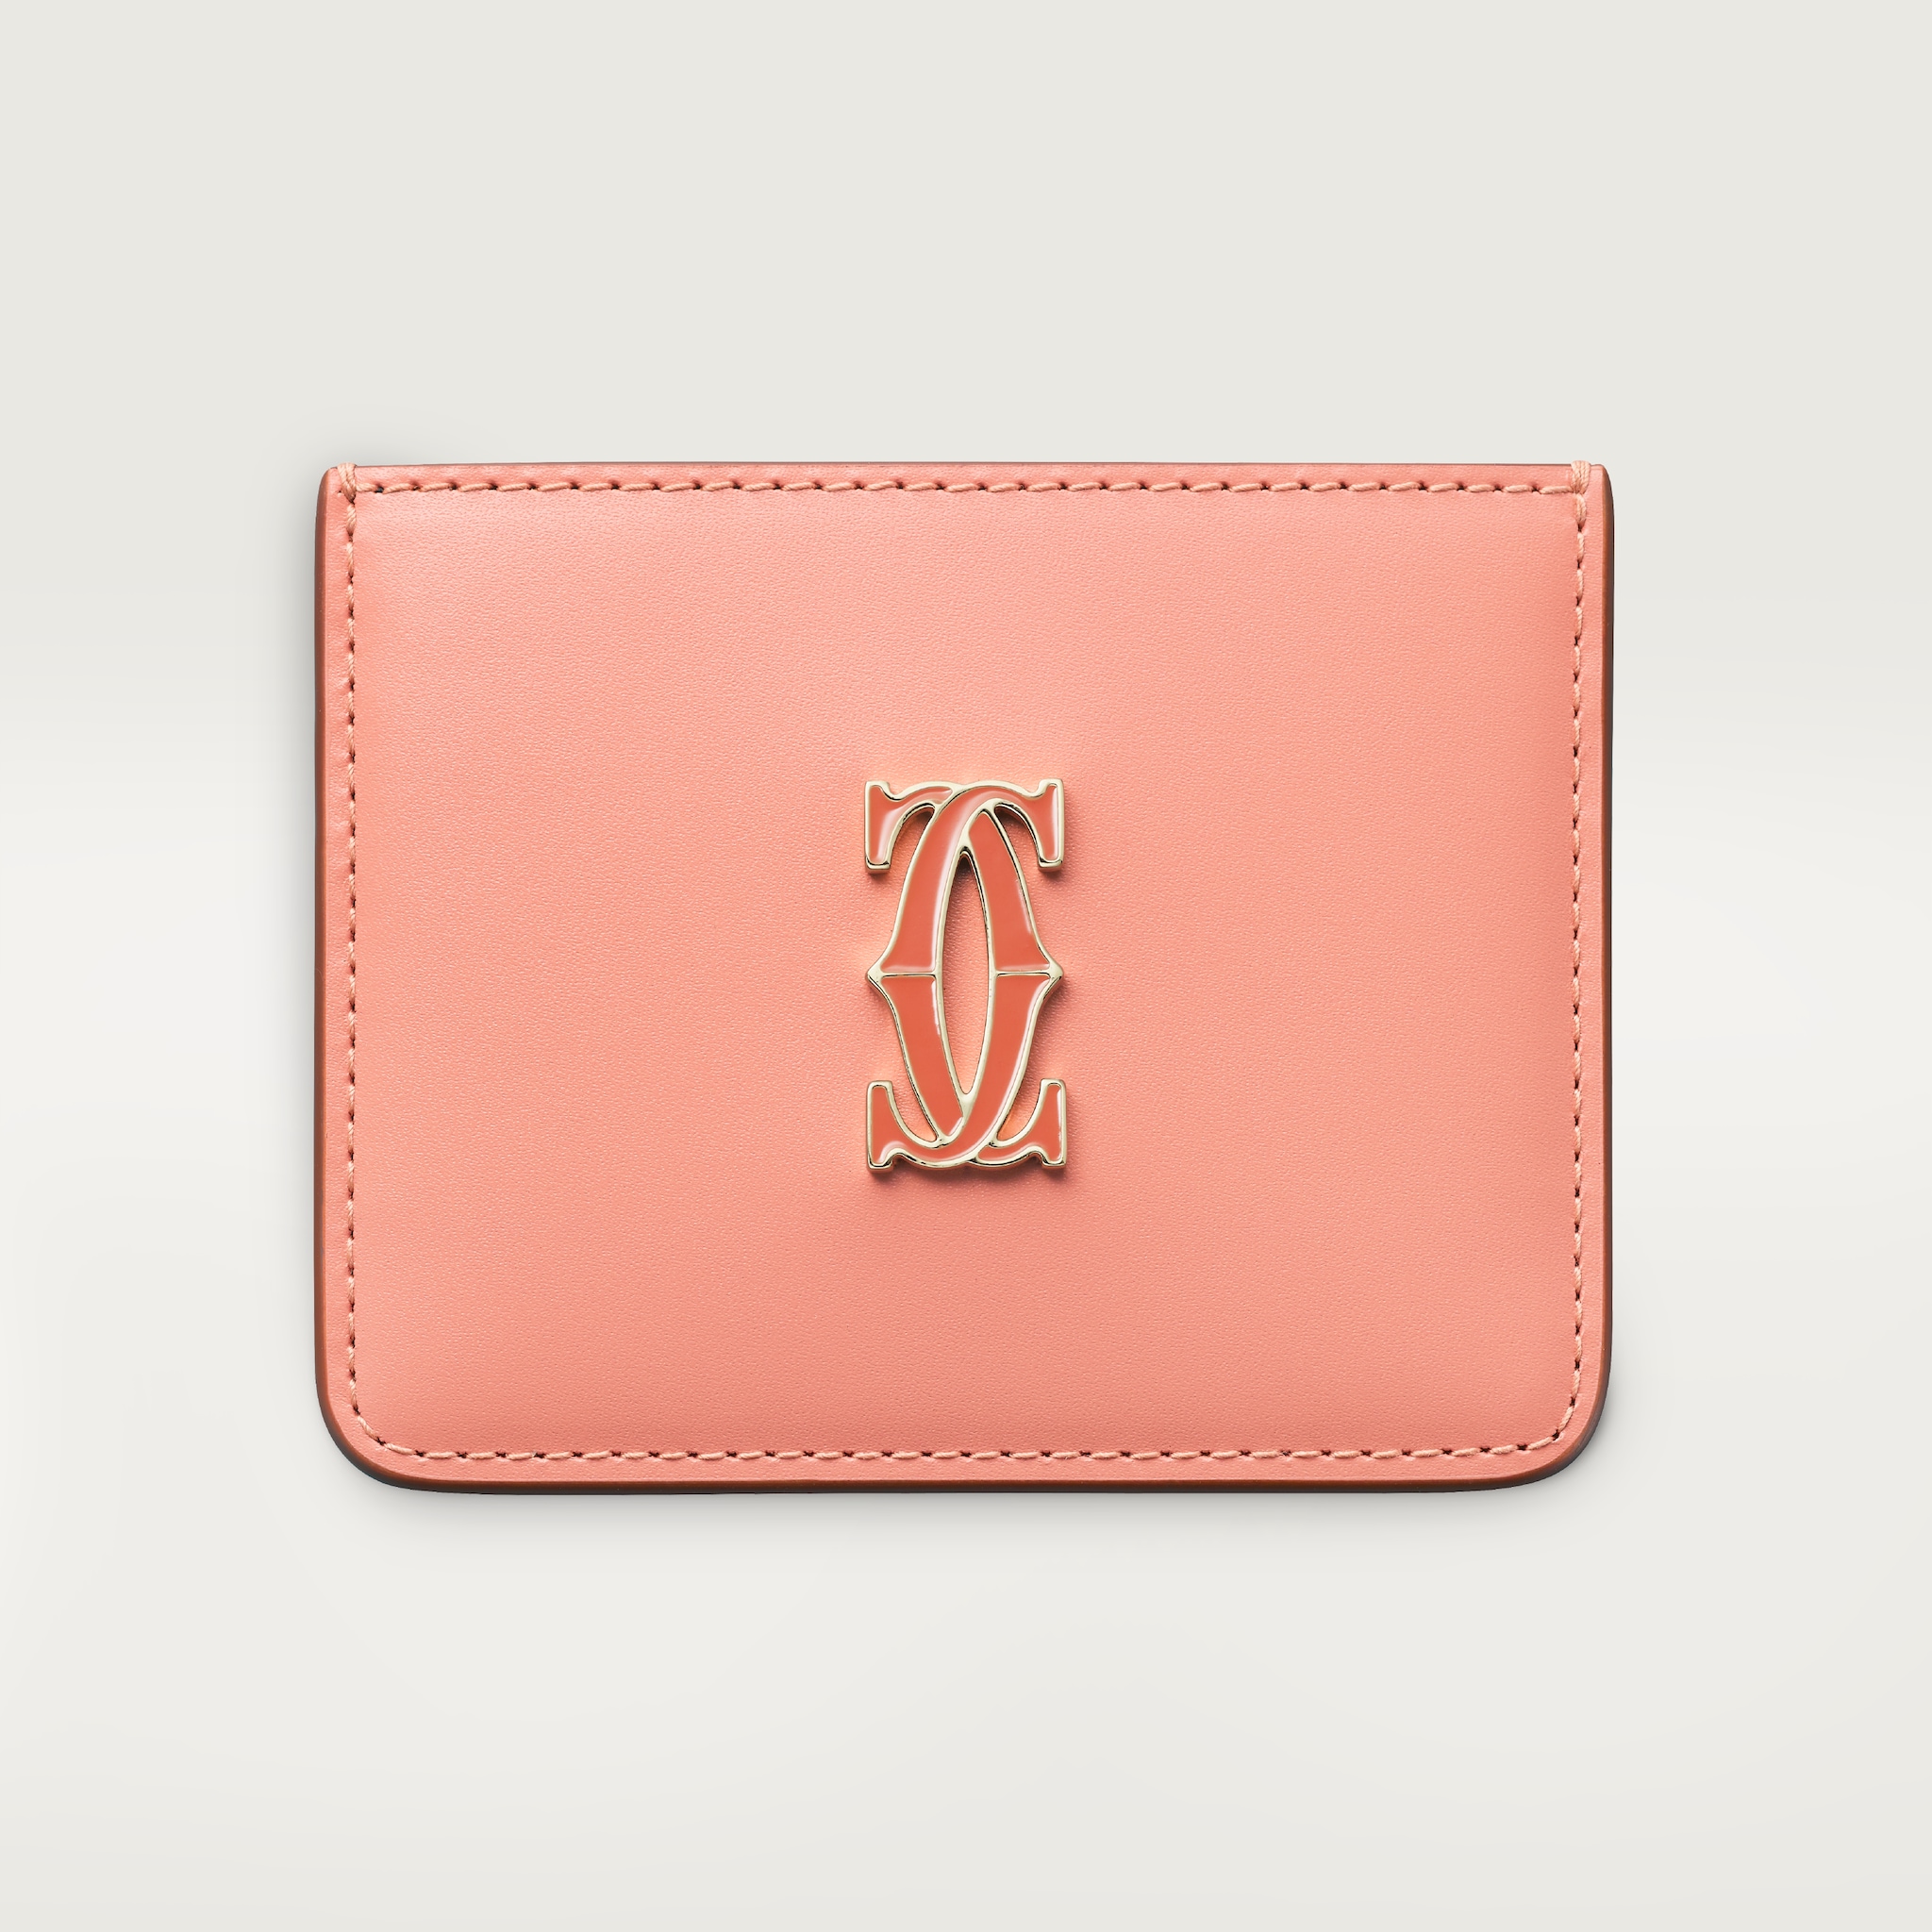 C de Cartier Small Leather Goods, Card holderTwo-tone coral/light coral calfskin, golden finish and coral/light coral enamel